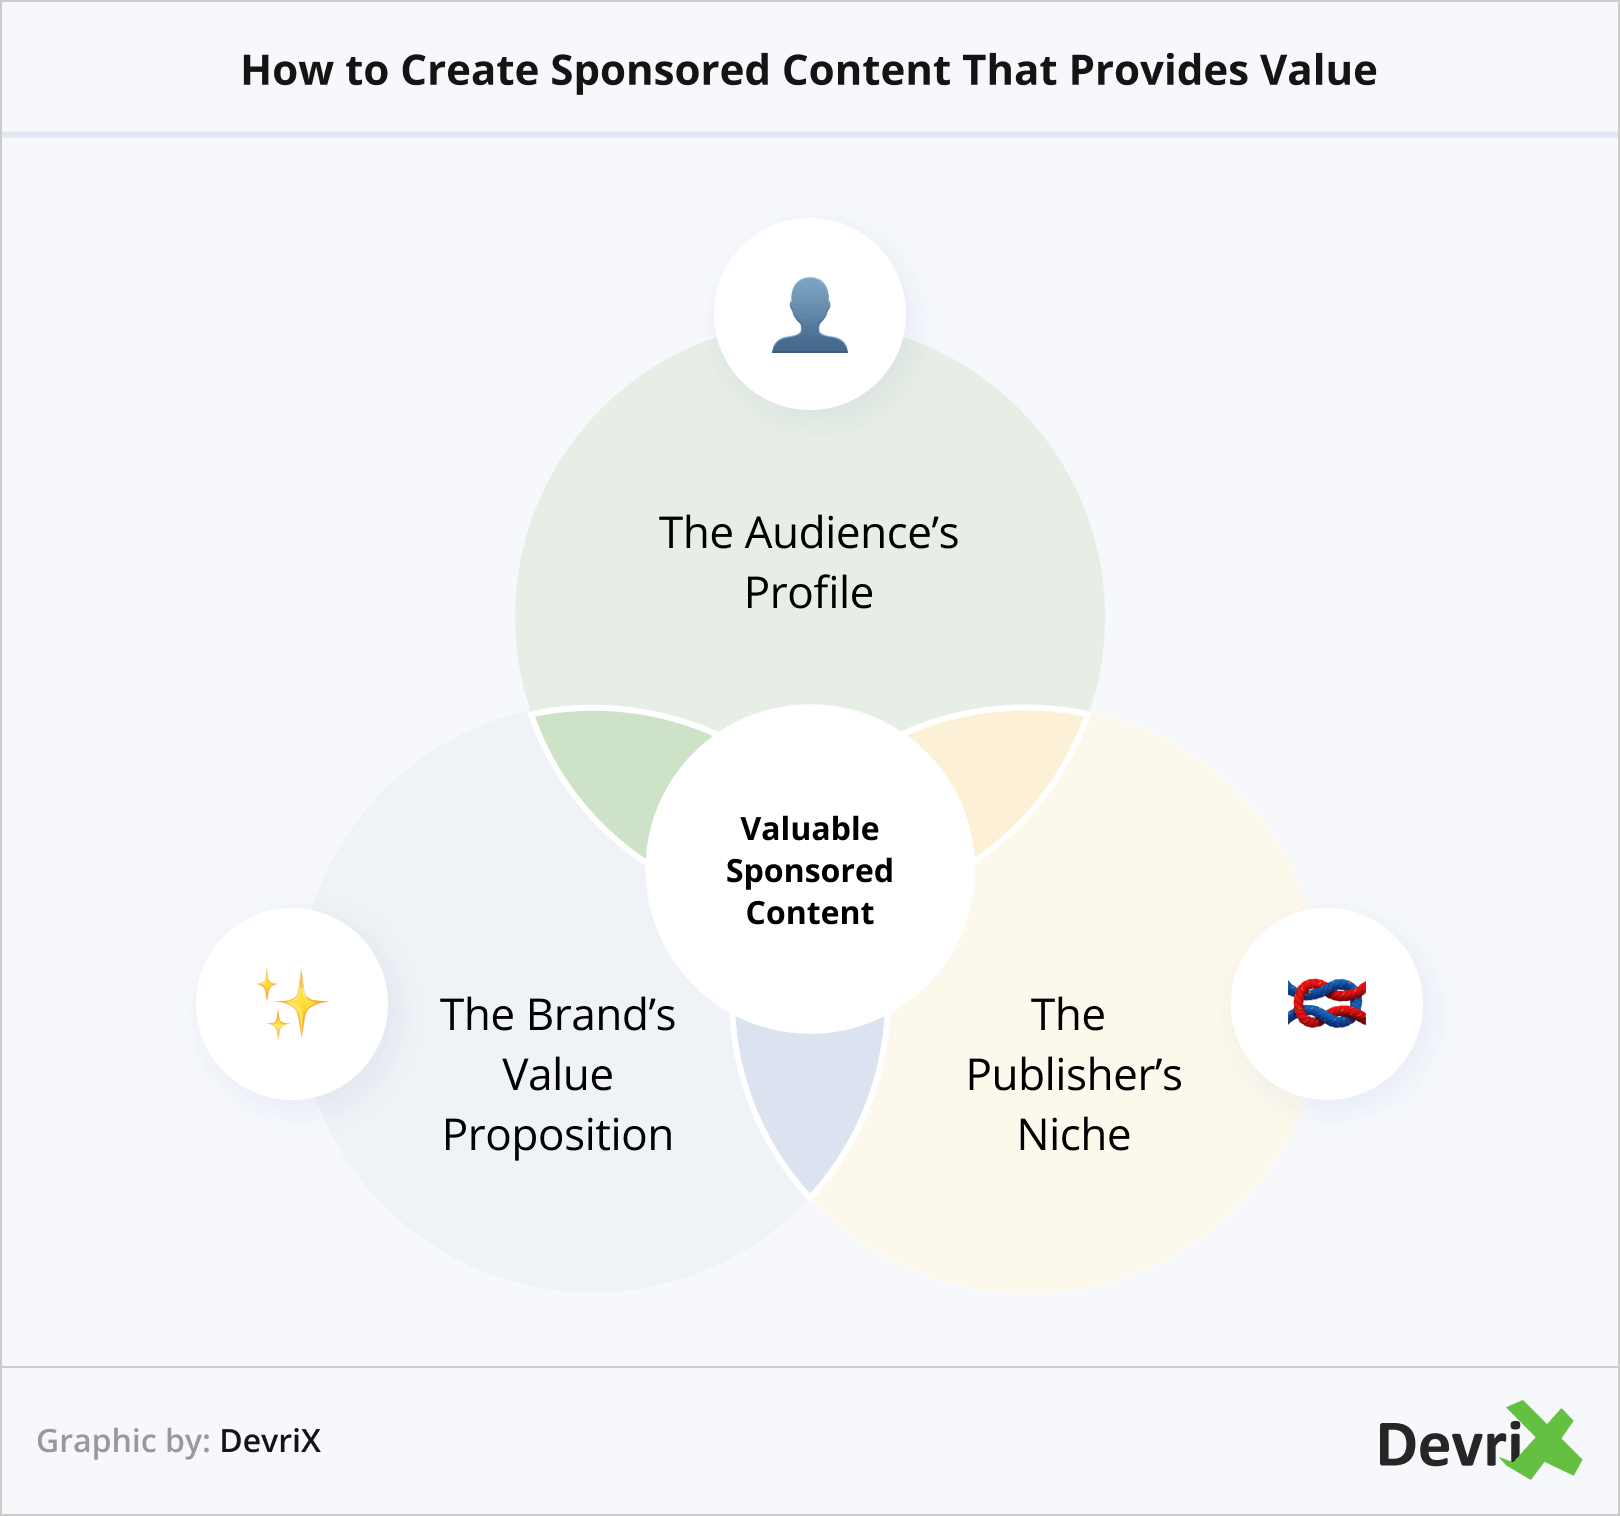 How to Create Sponsored Content That Provides Value